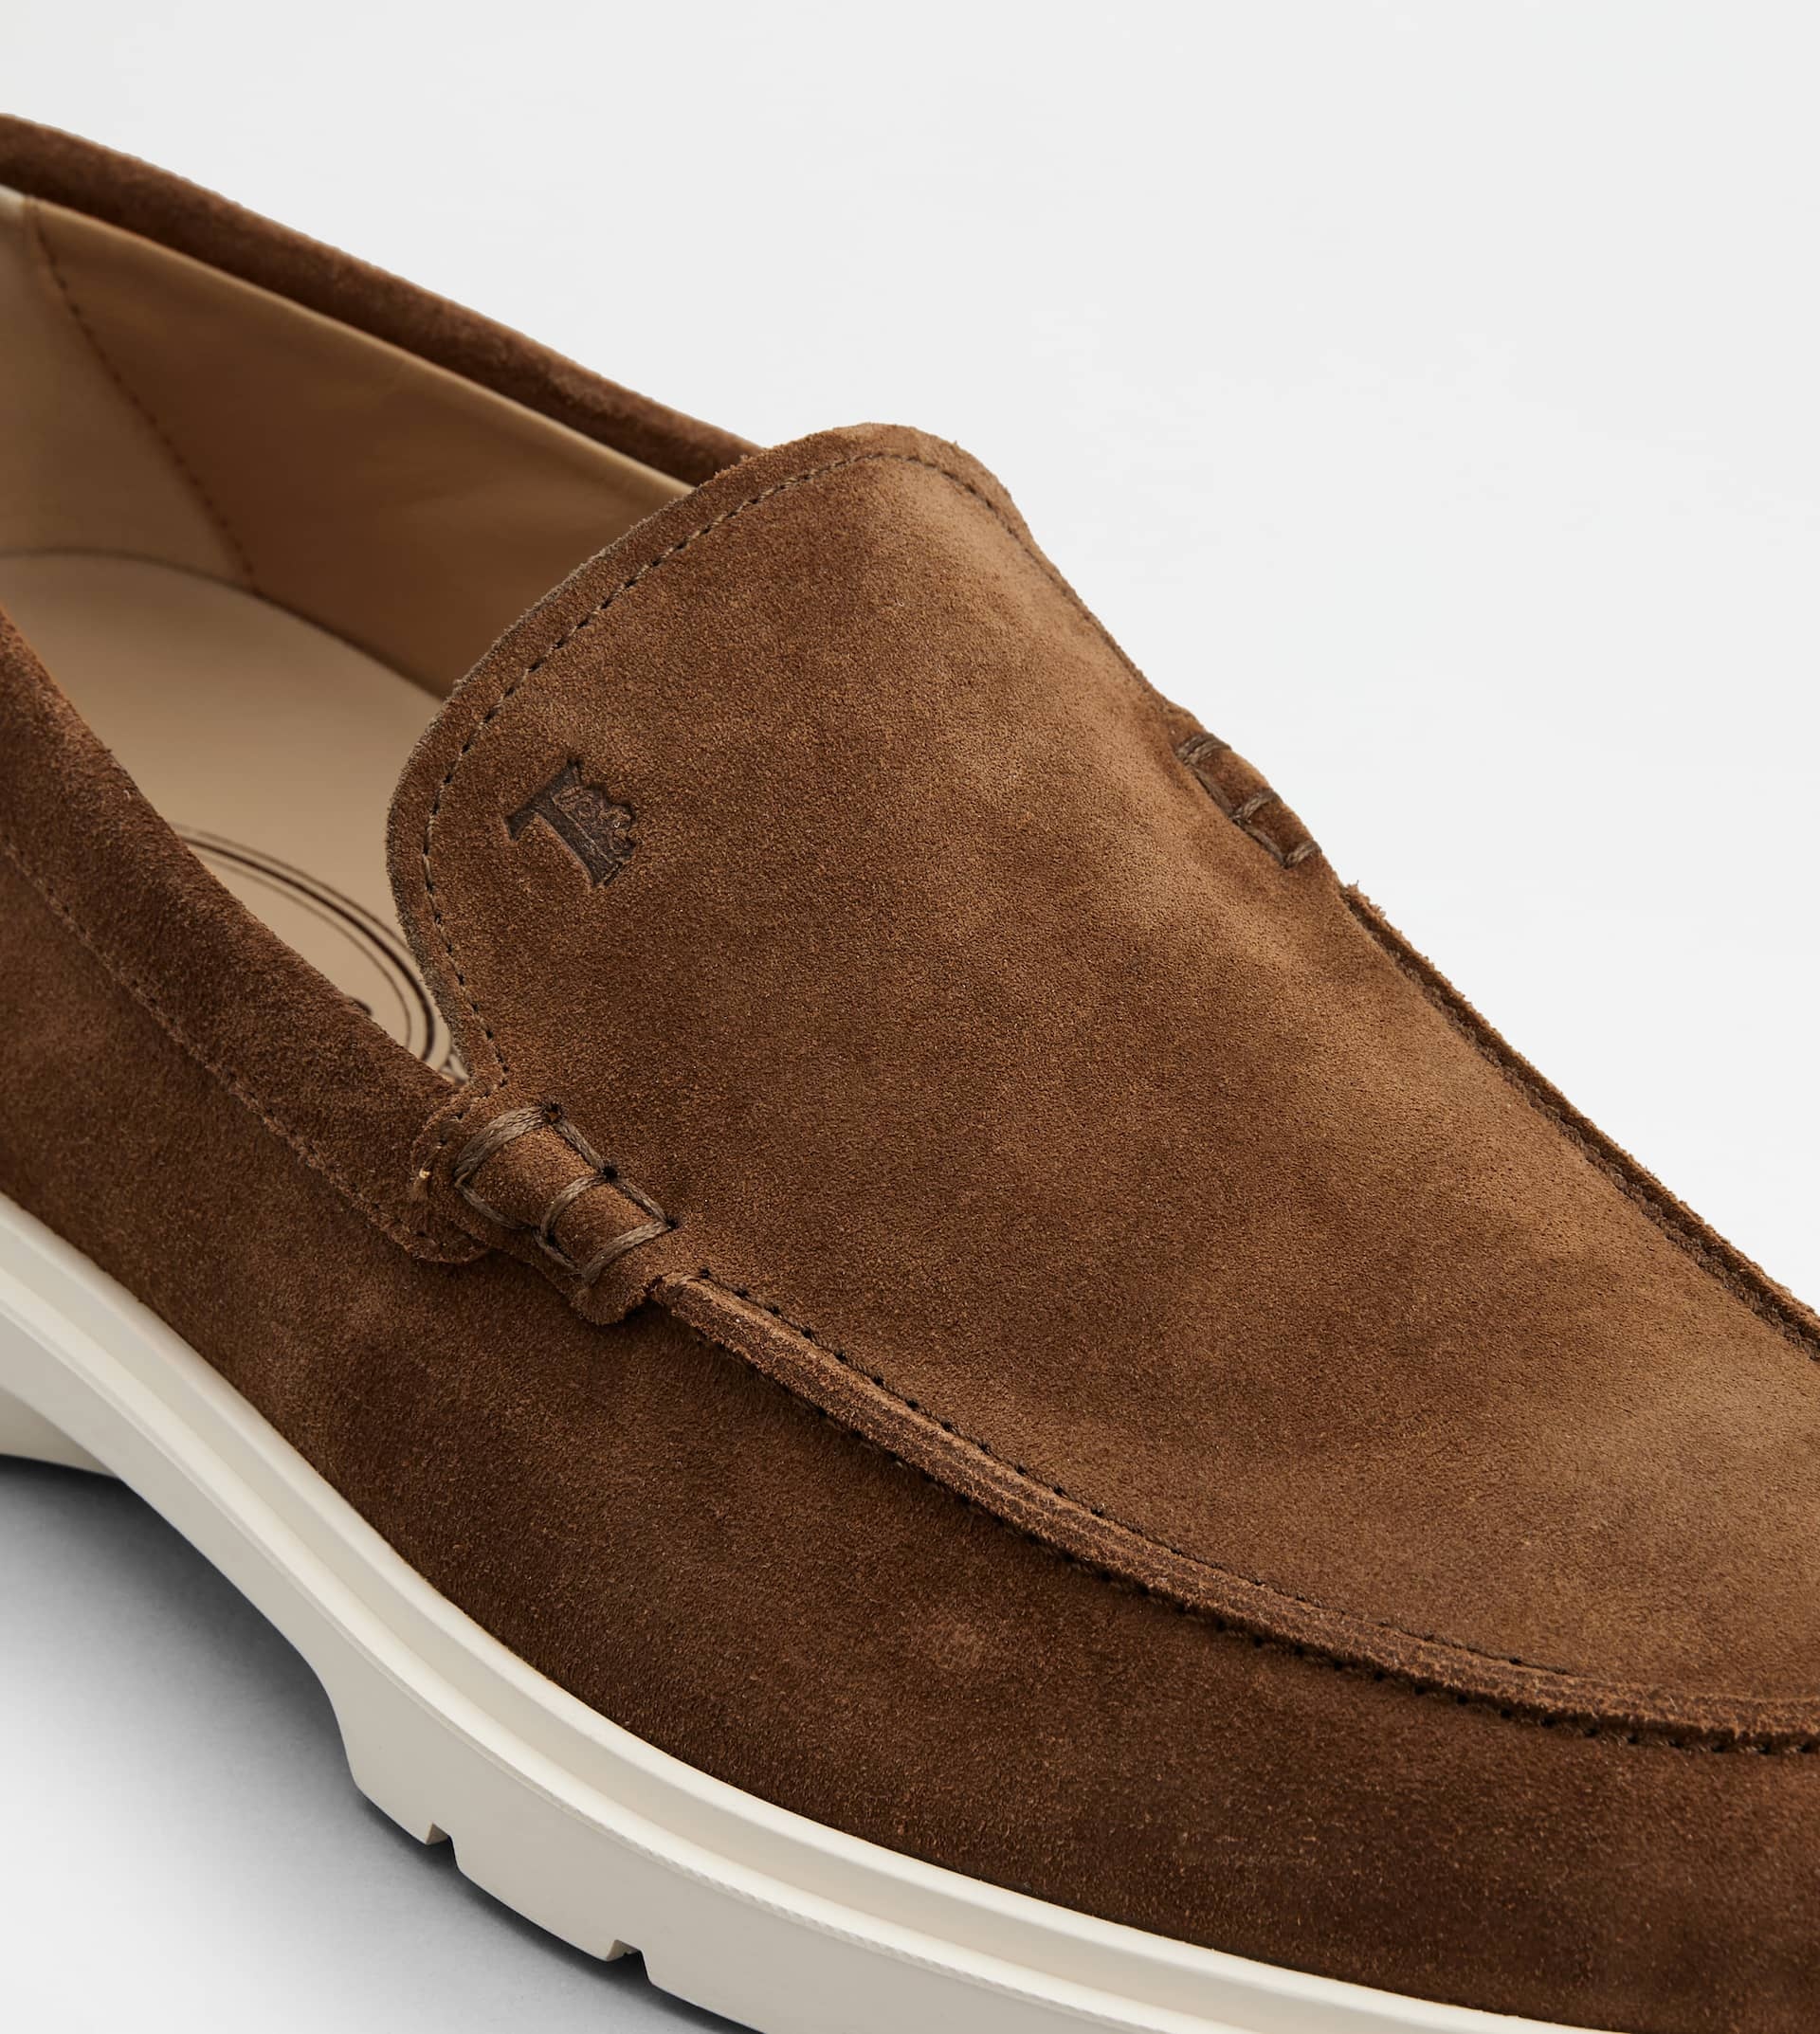 SLIPPER LOAFERS IN SUEDE - BROWN - 5